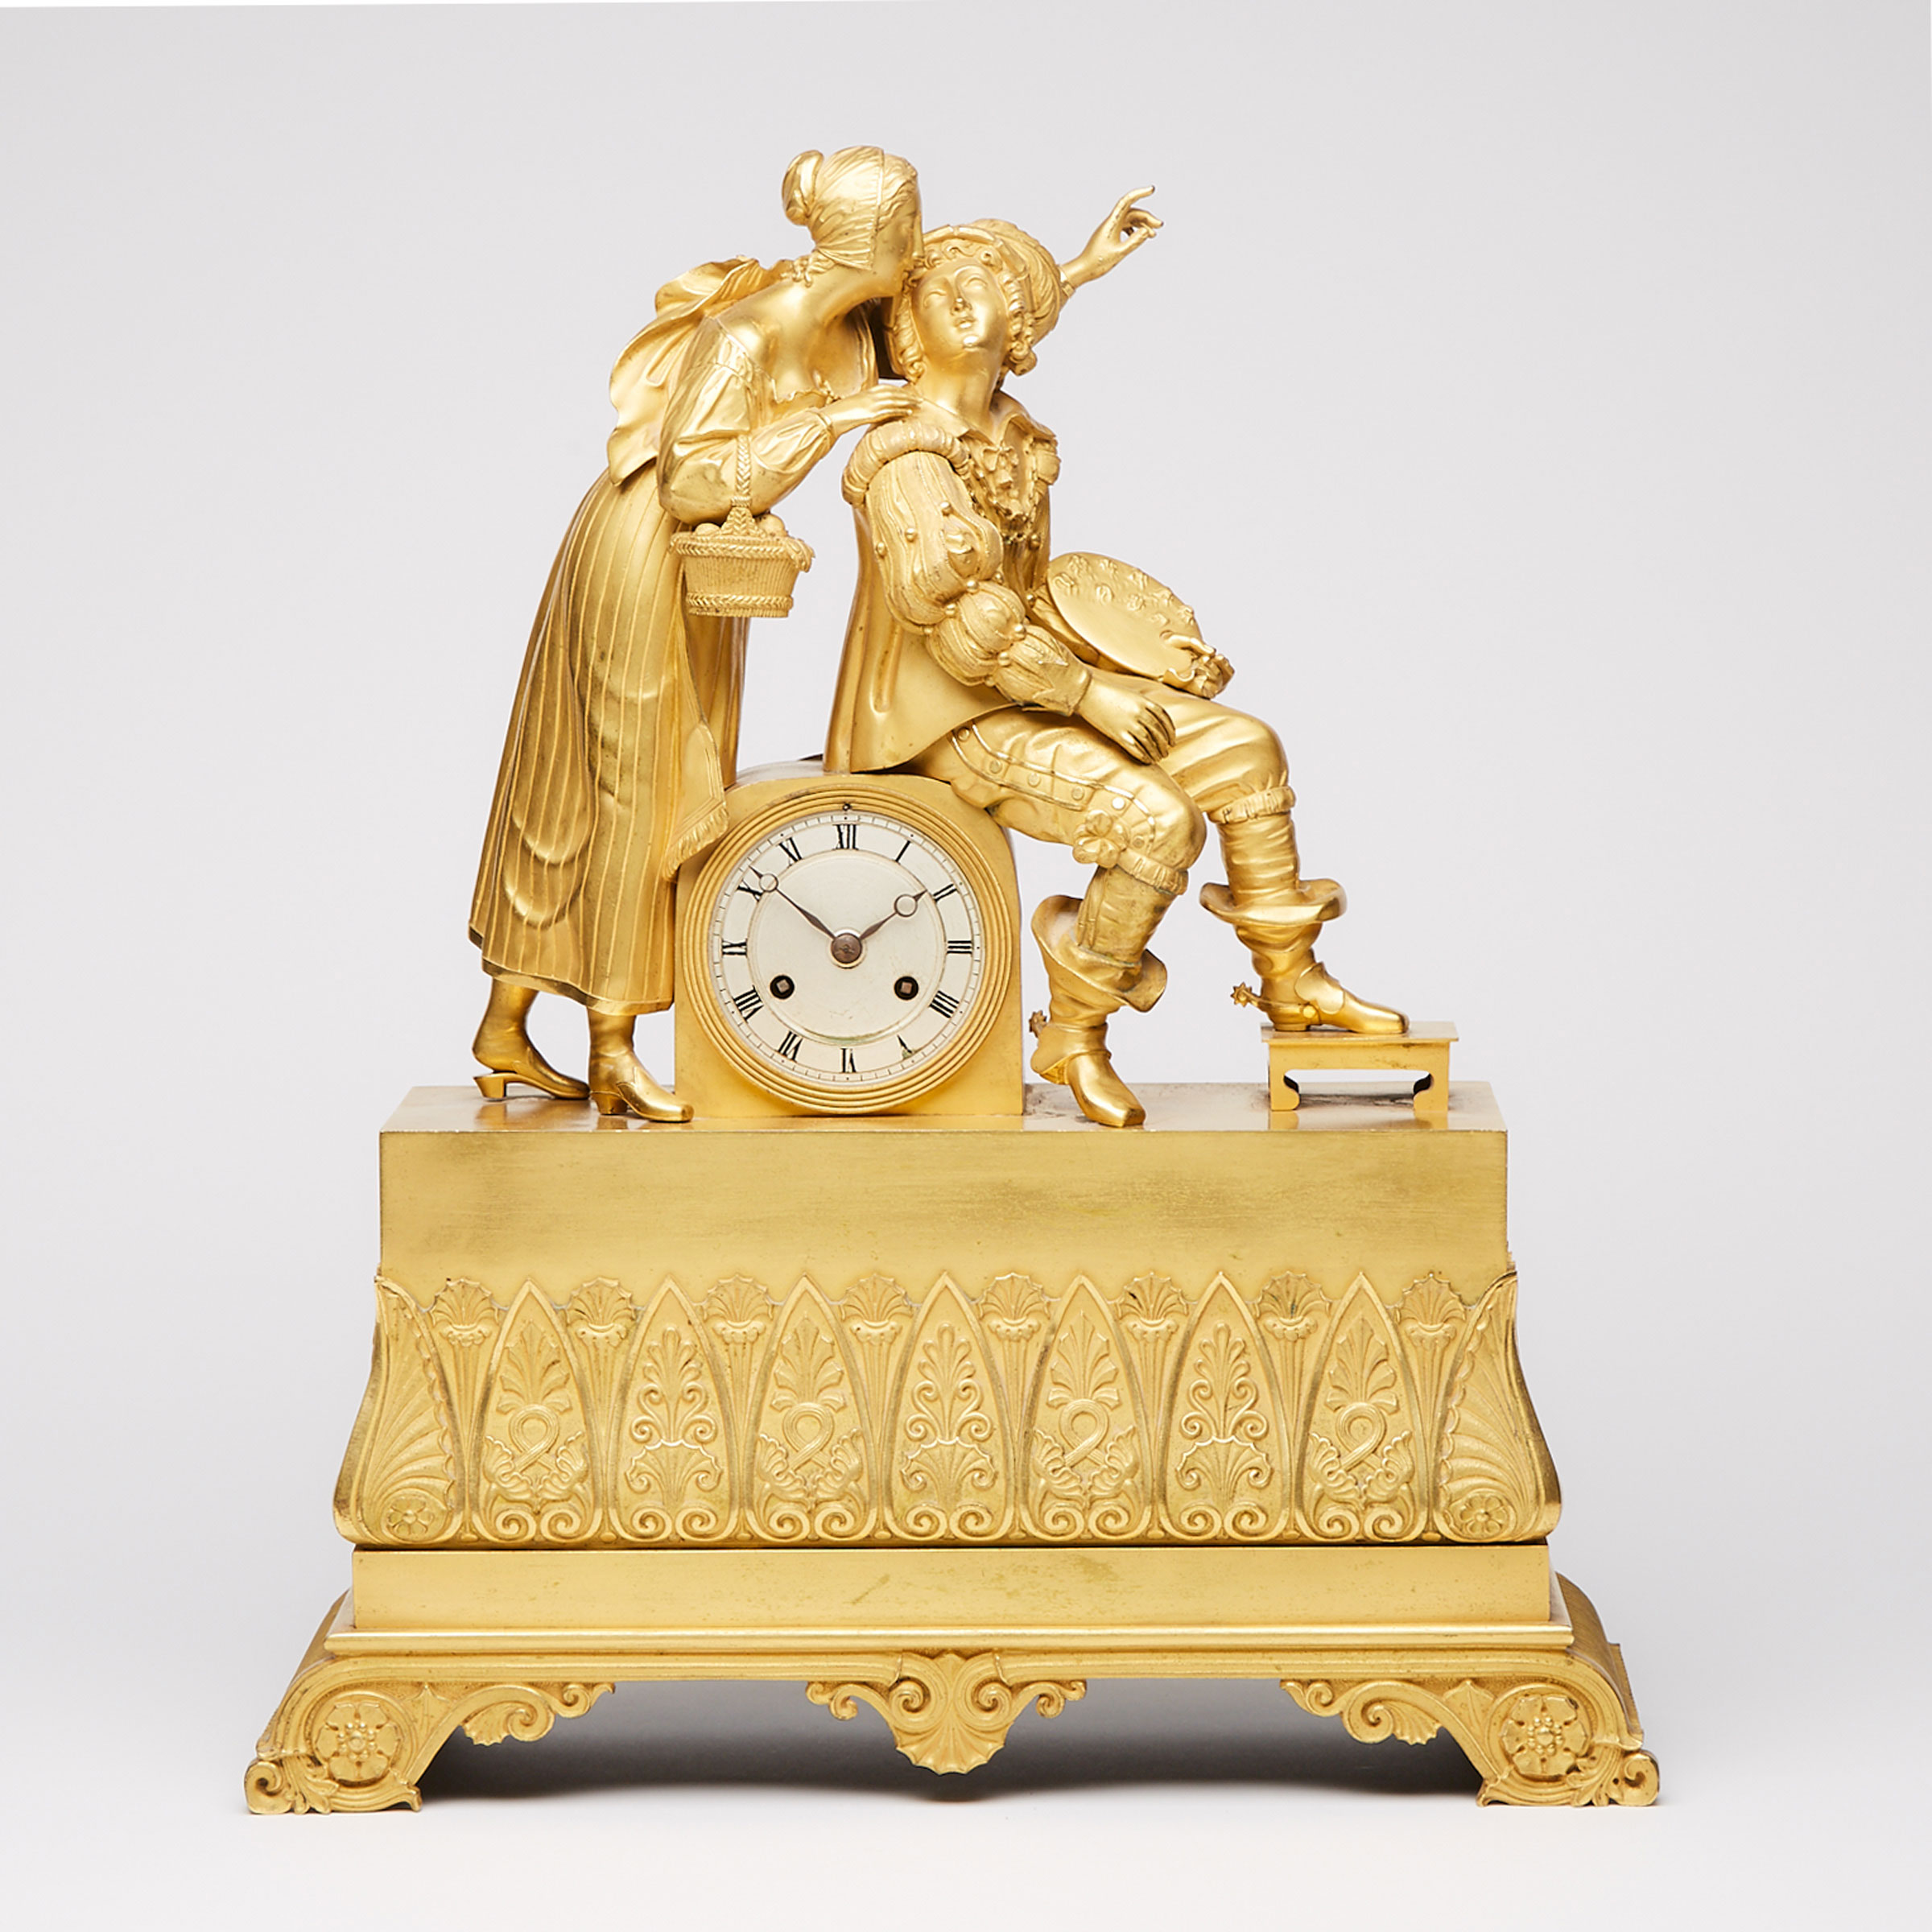 French Empire Gilt Bronze Figural Mantel Clock, early 19th century